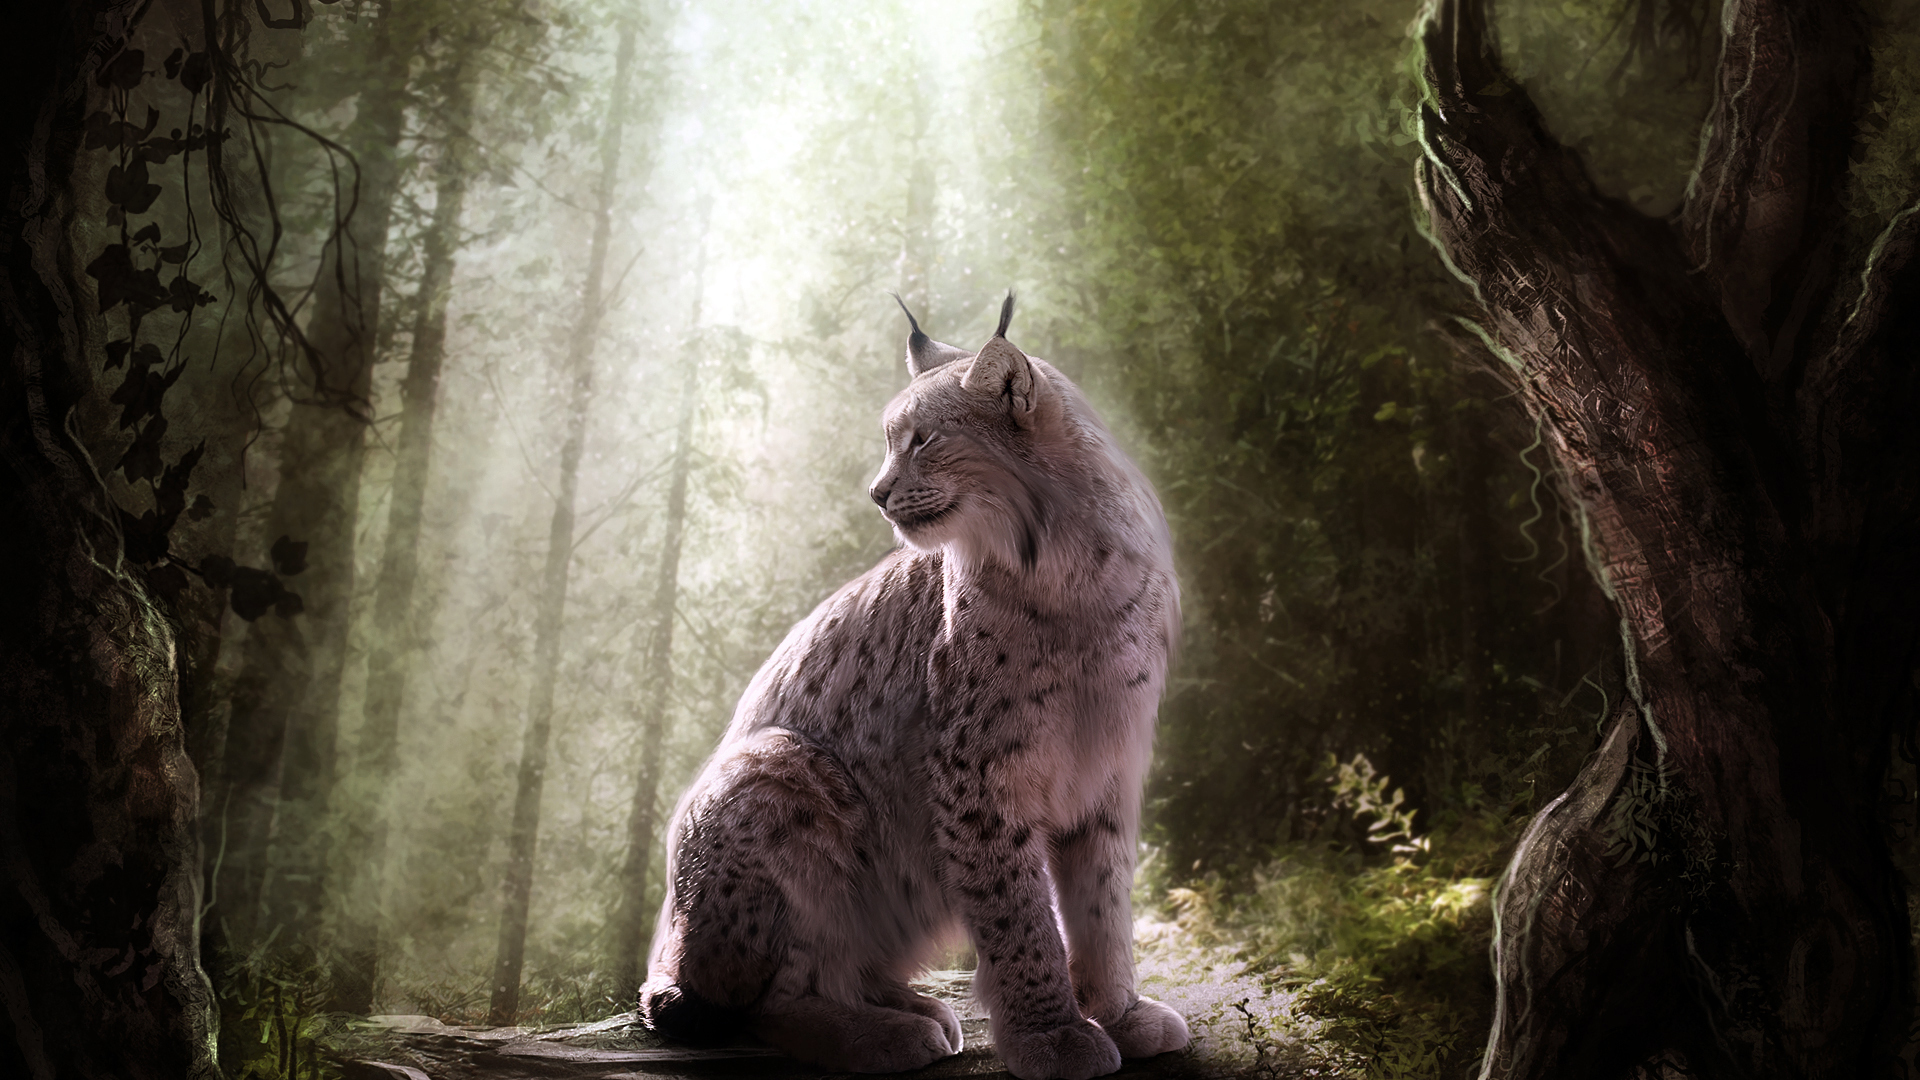 Download wallpaper 938x1668 lynx big cat cute iphone 876s6 for  parallax hd background